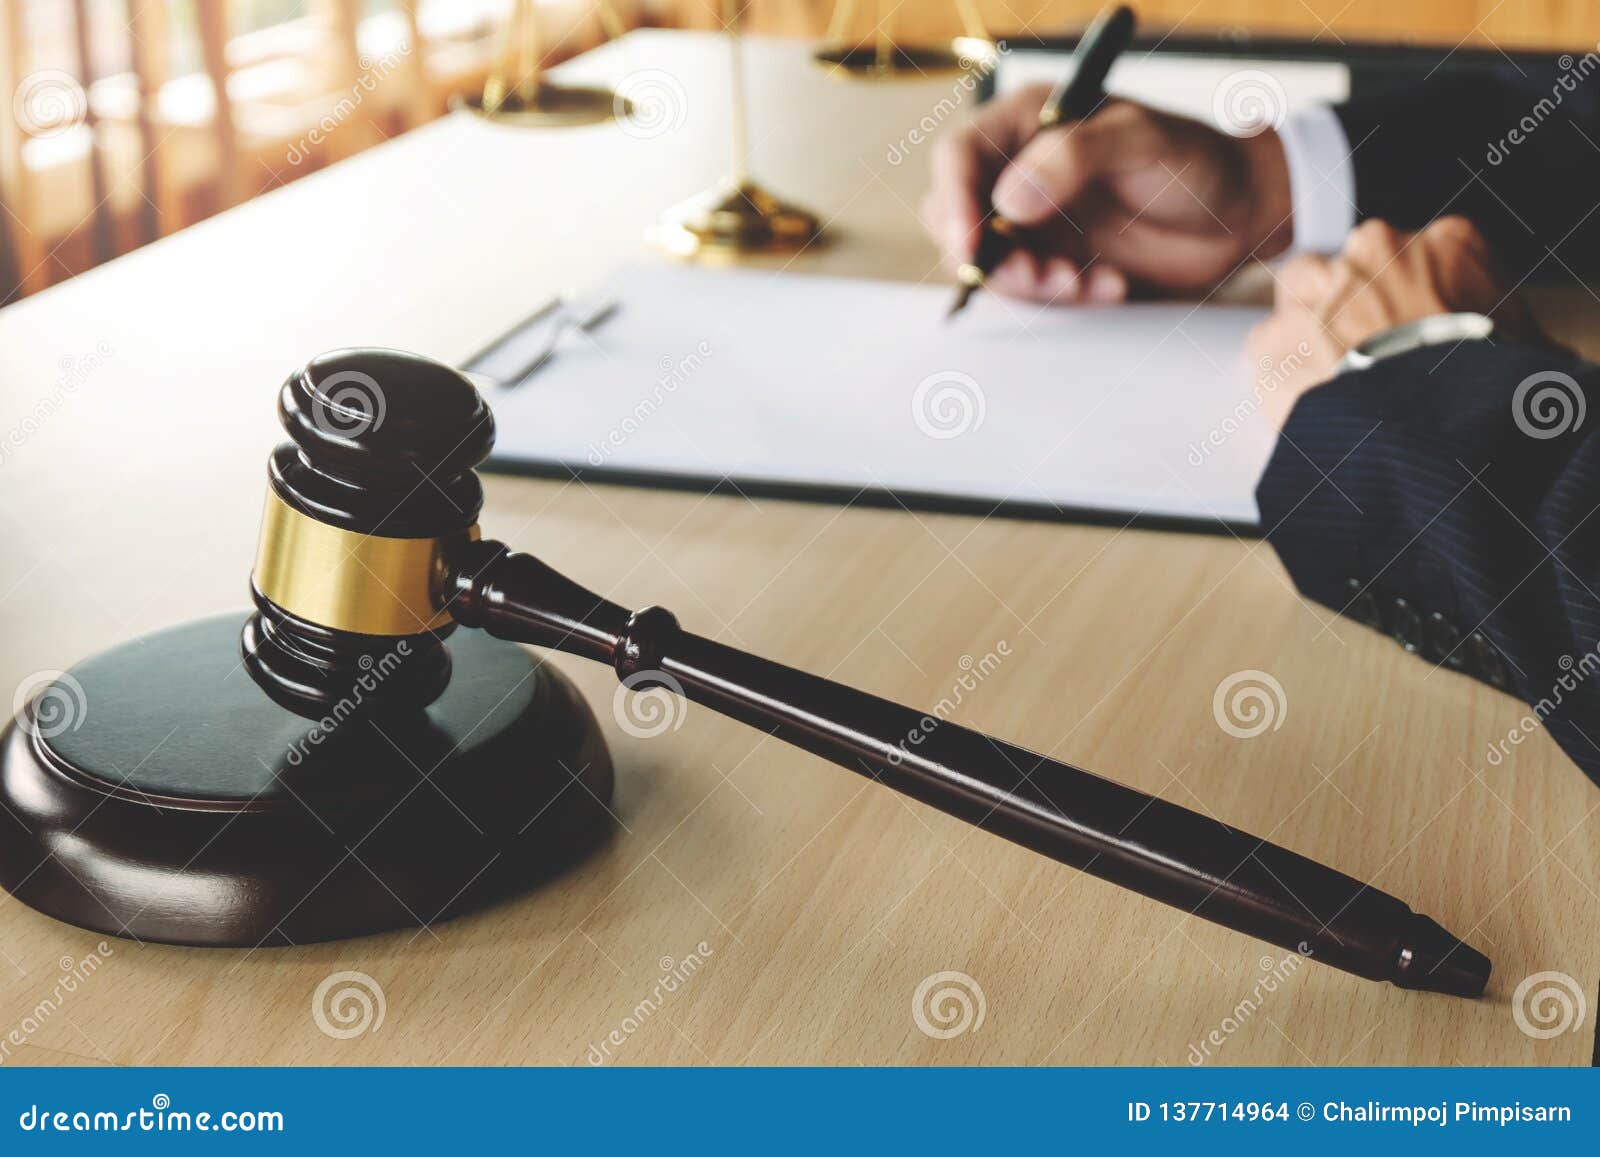 justice and law concept. lawyer working on paper documents at courtroom